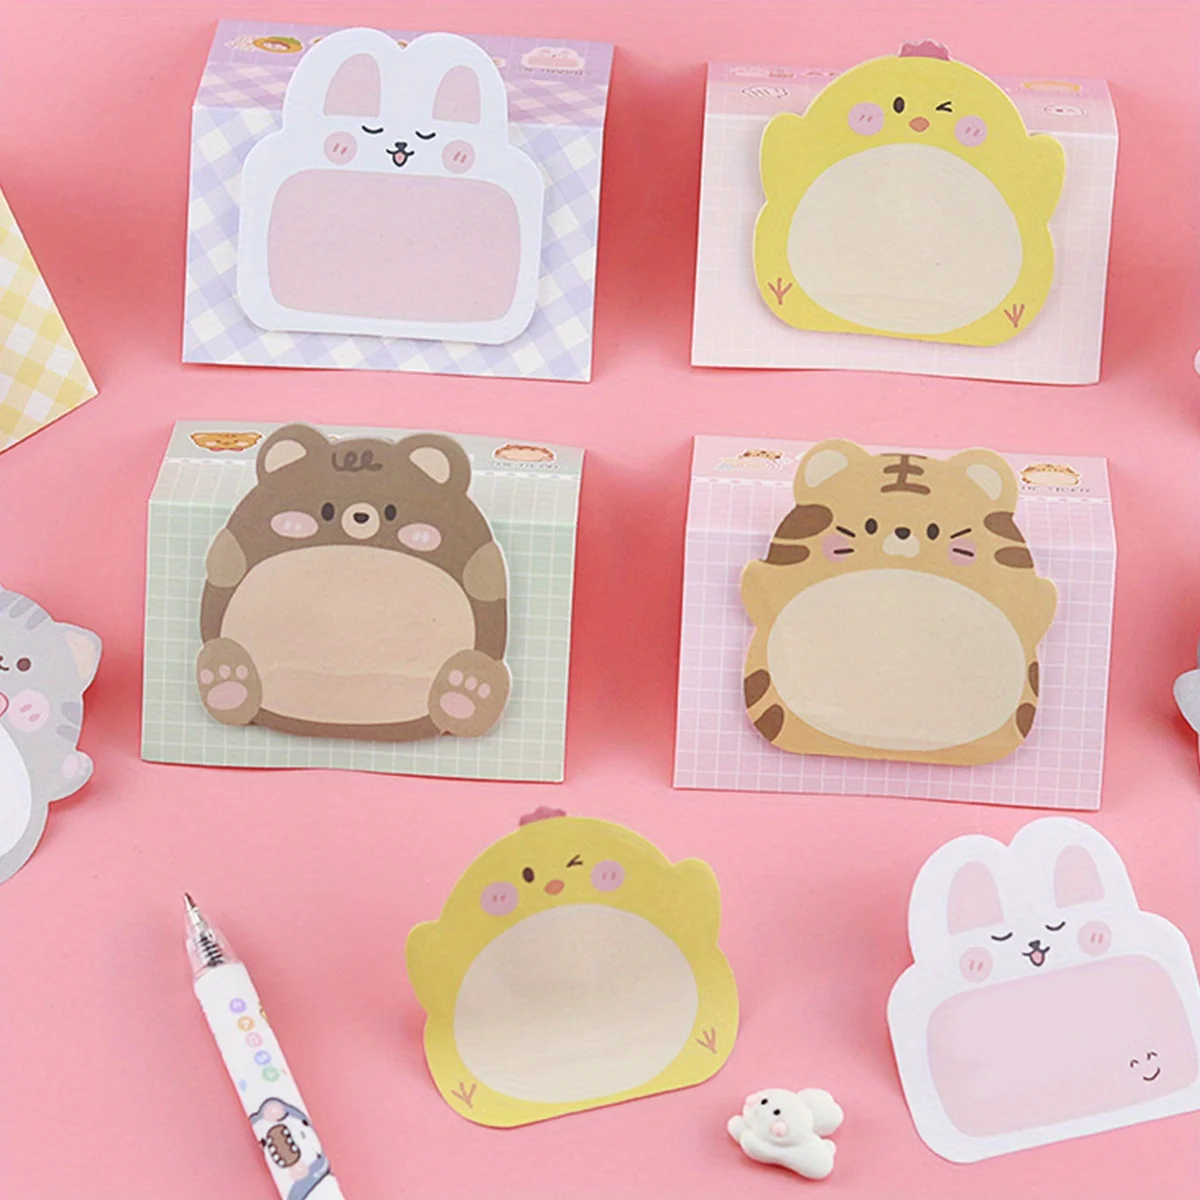 8 Pcs Cartoon Small Animal Special-shaped Sticky Notes Office Simple Shape Creative Sticky Notes Cute Colorful Note Stationery